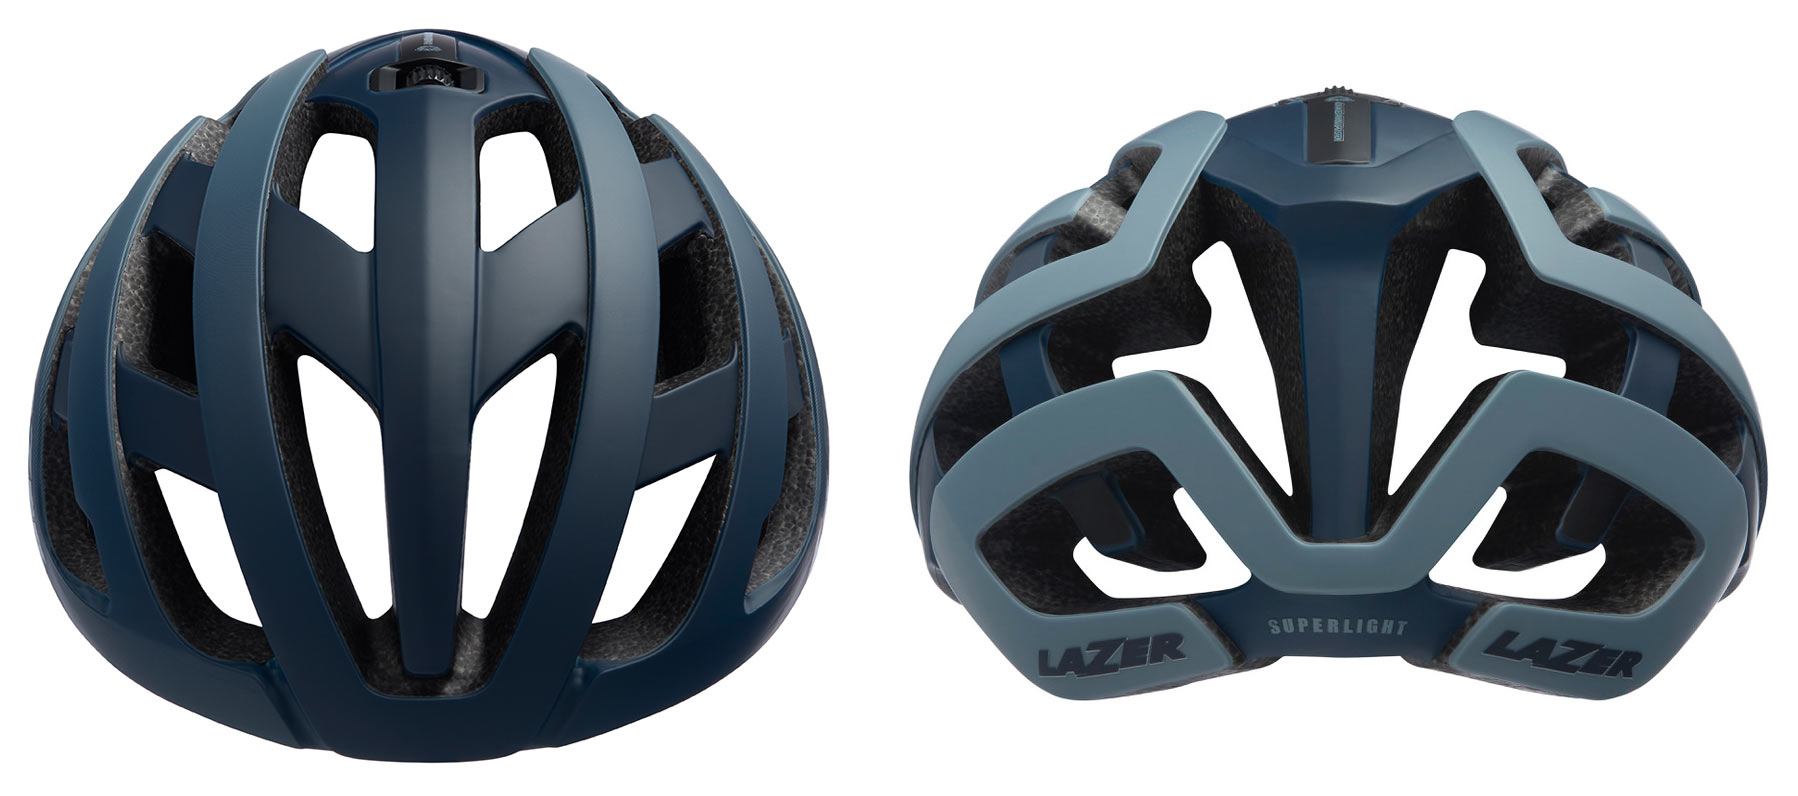 Lazer G1 is one of the lightest production road bike helmets on the market for 2020